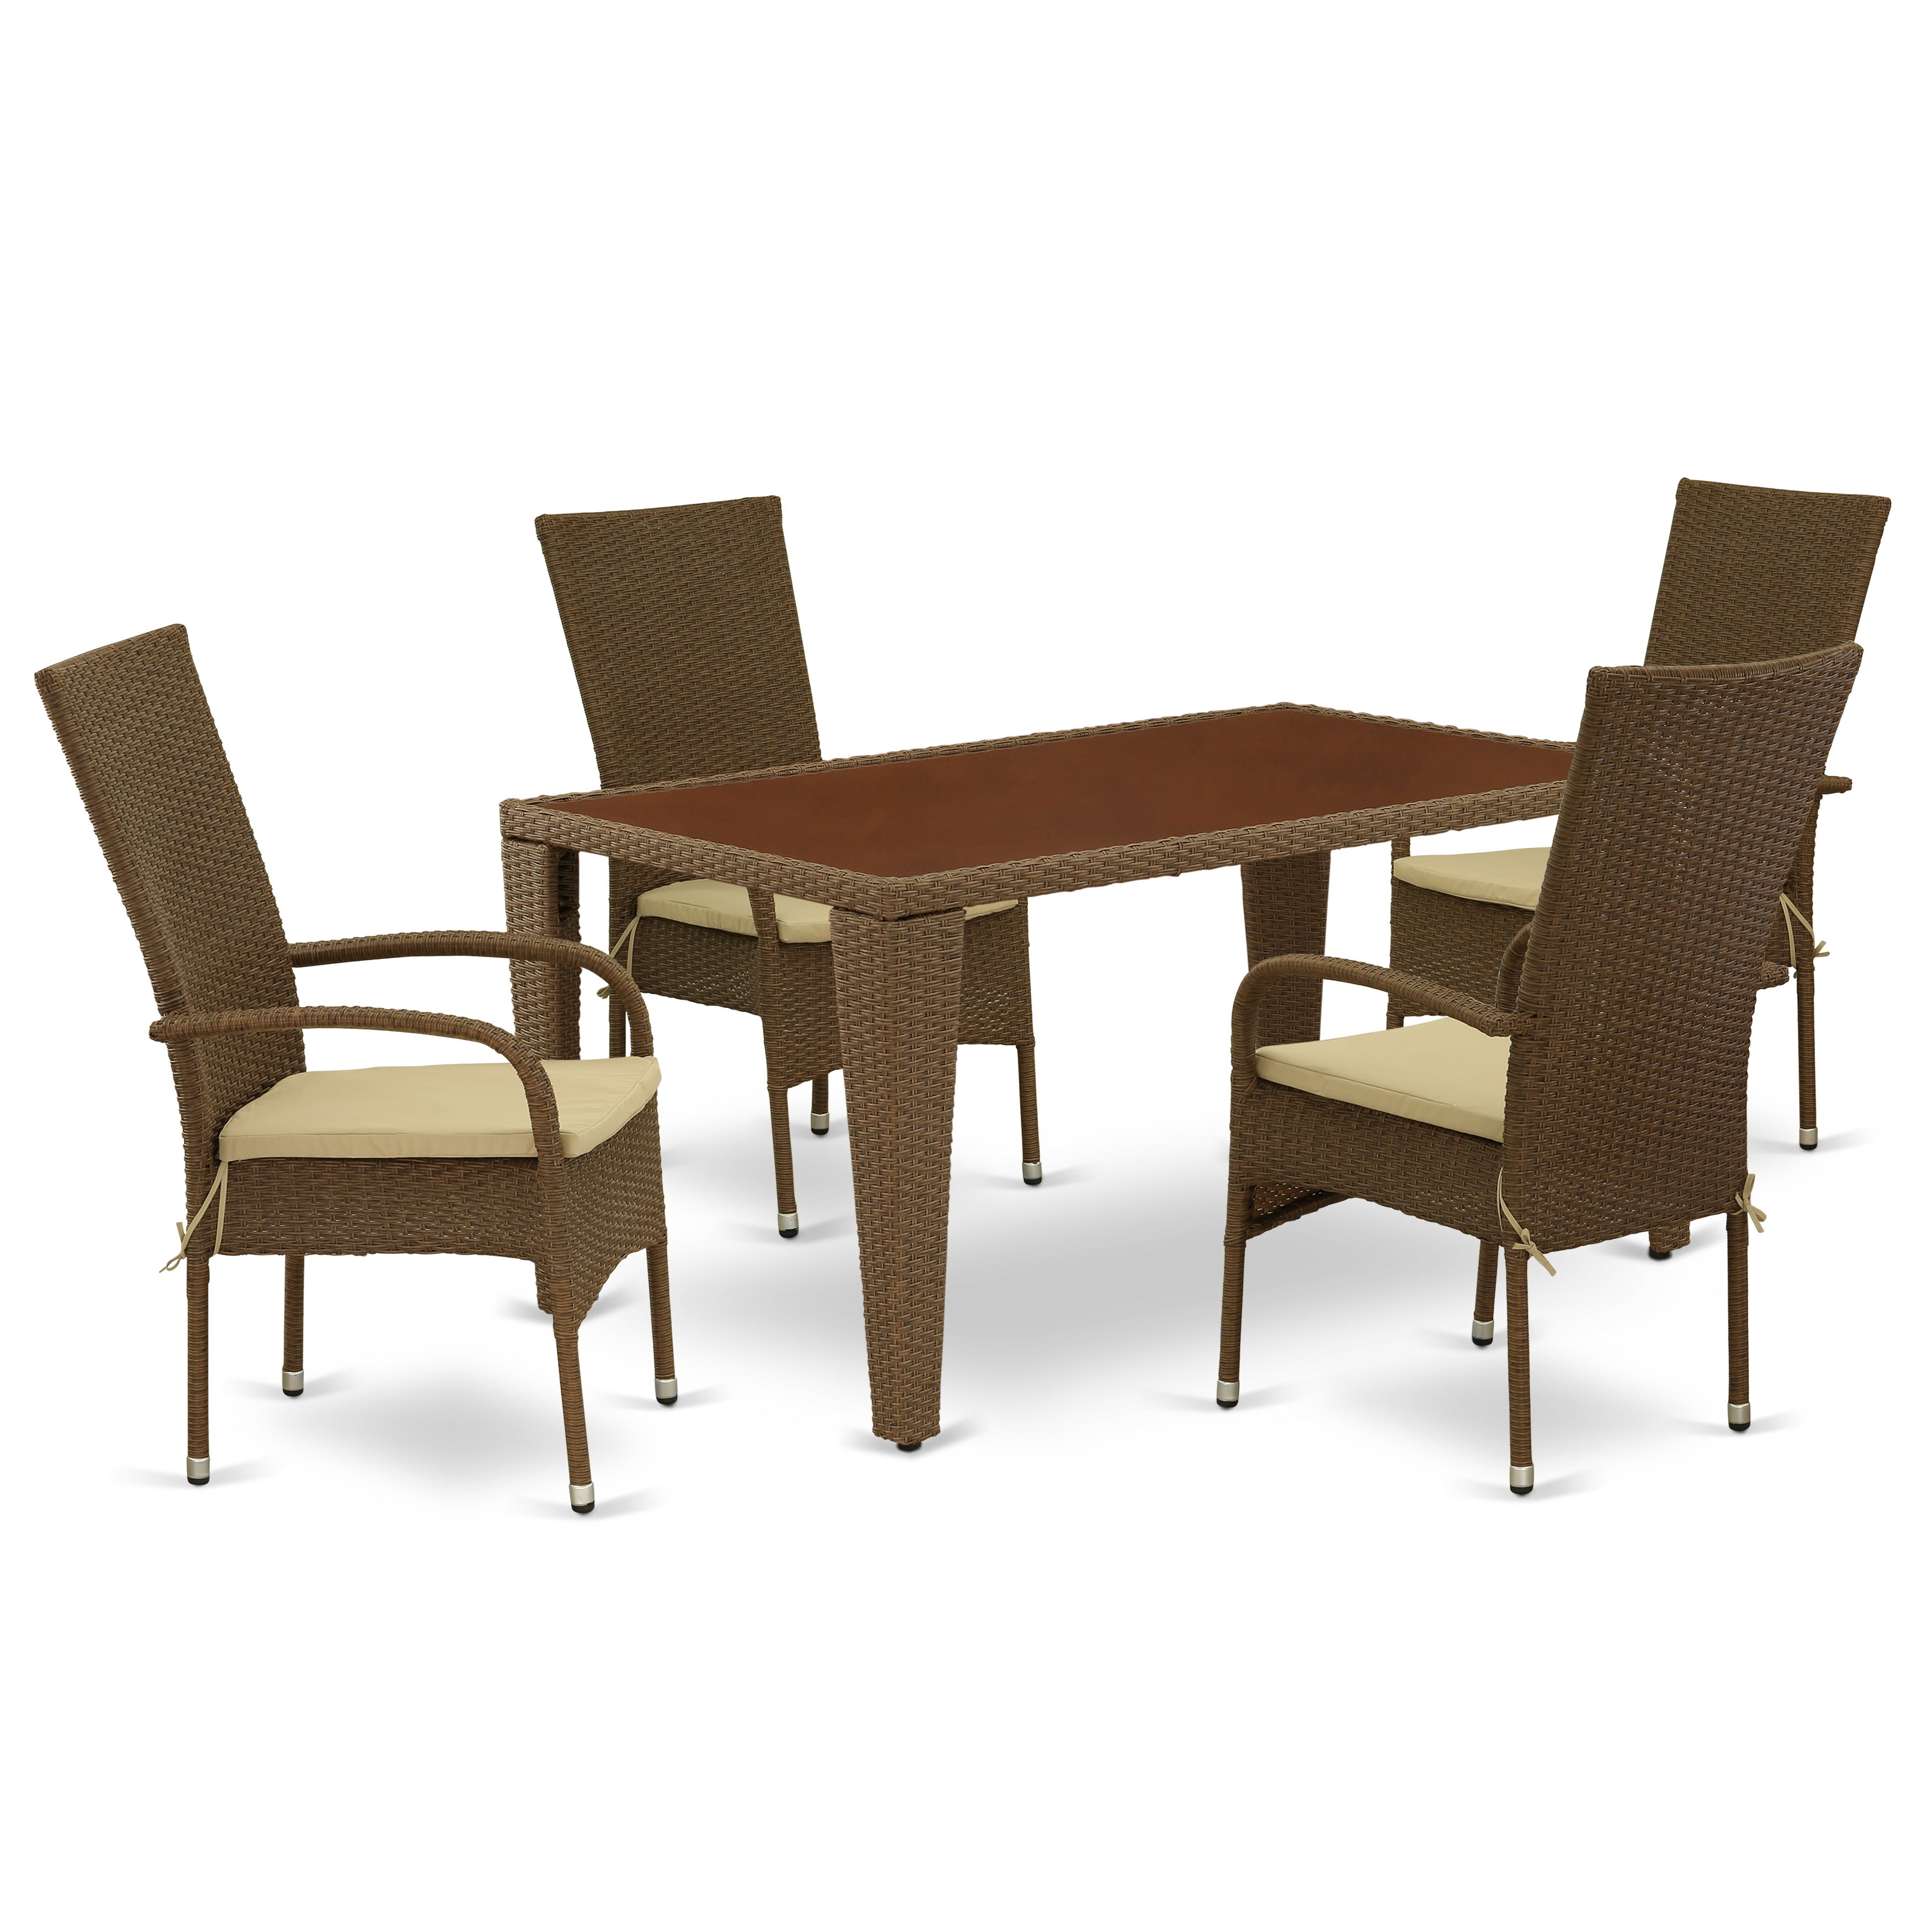 GUOS5-02A 5Pc Outdoor-Furniture Brown Wicker Dining Set Includes a Patio Table and 4 Balcony Backyard Armchair with Linen Fabric Cushion